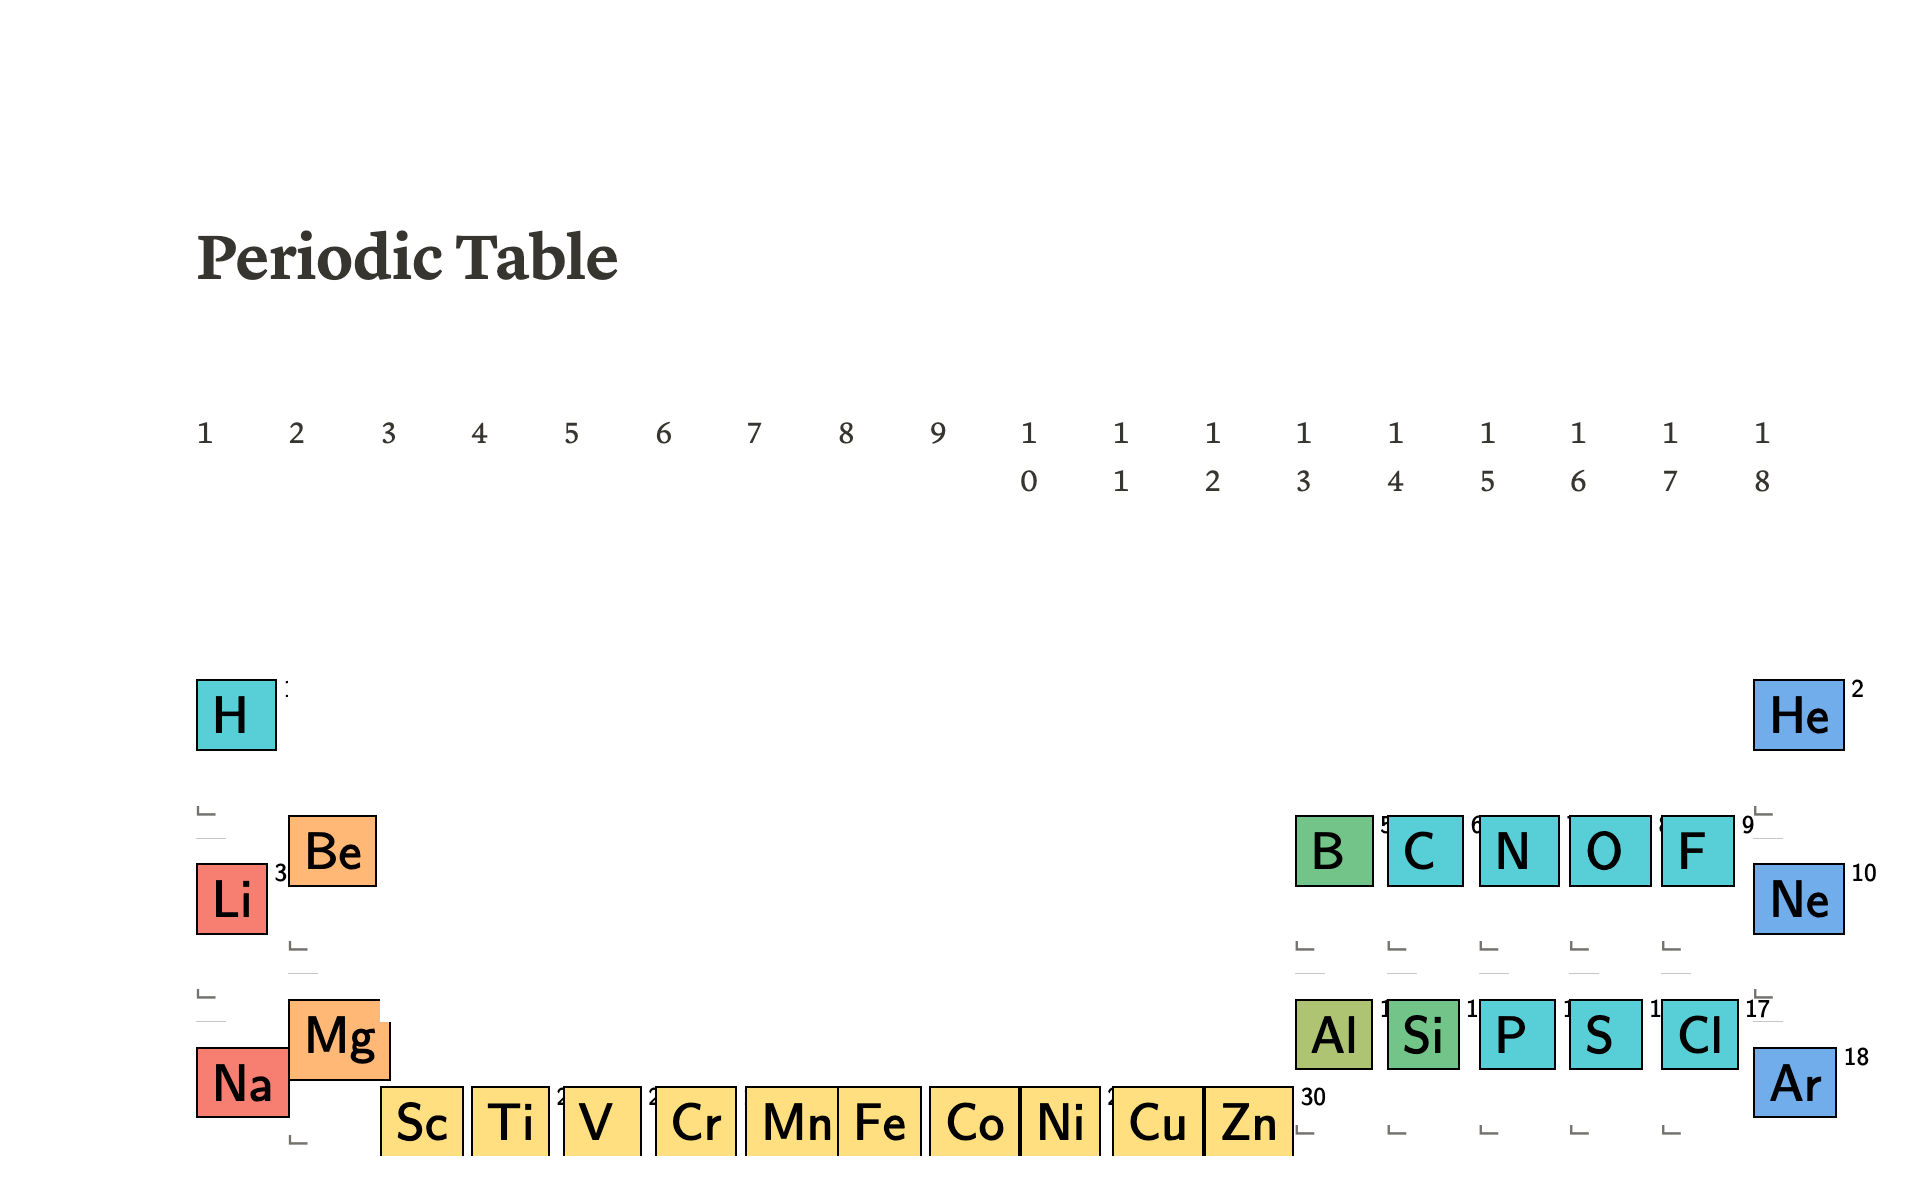 Provides a Periodic Table, along with subpages for each element.